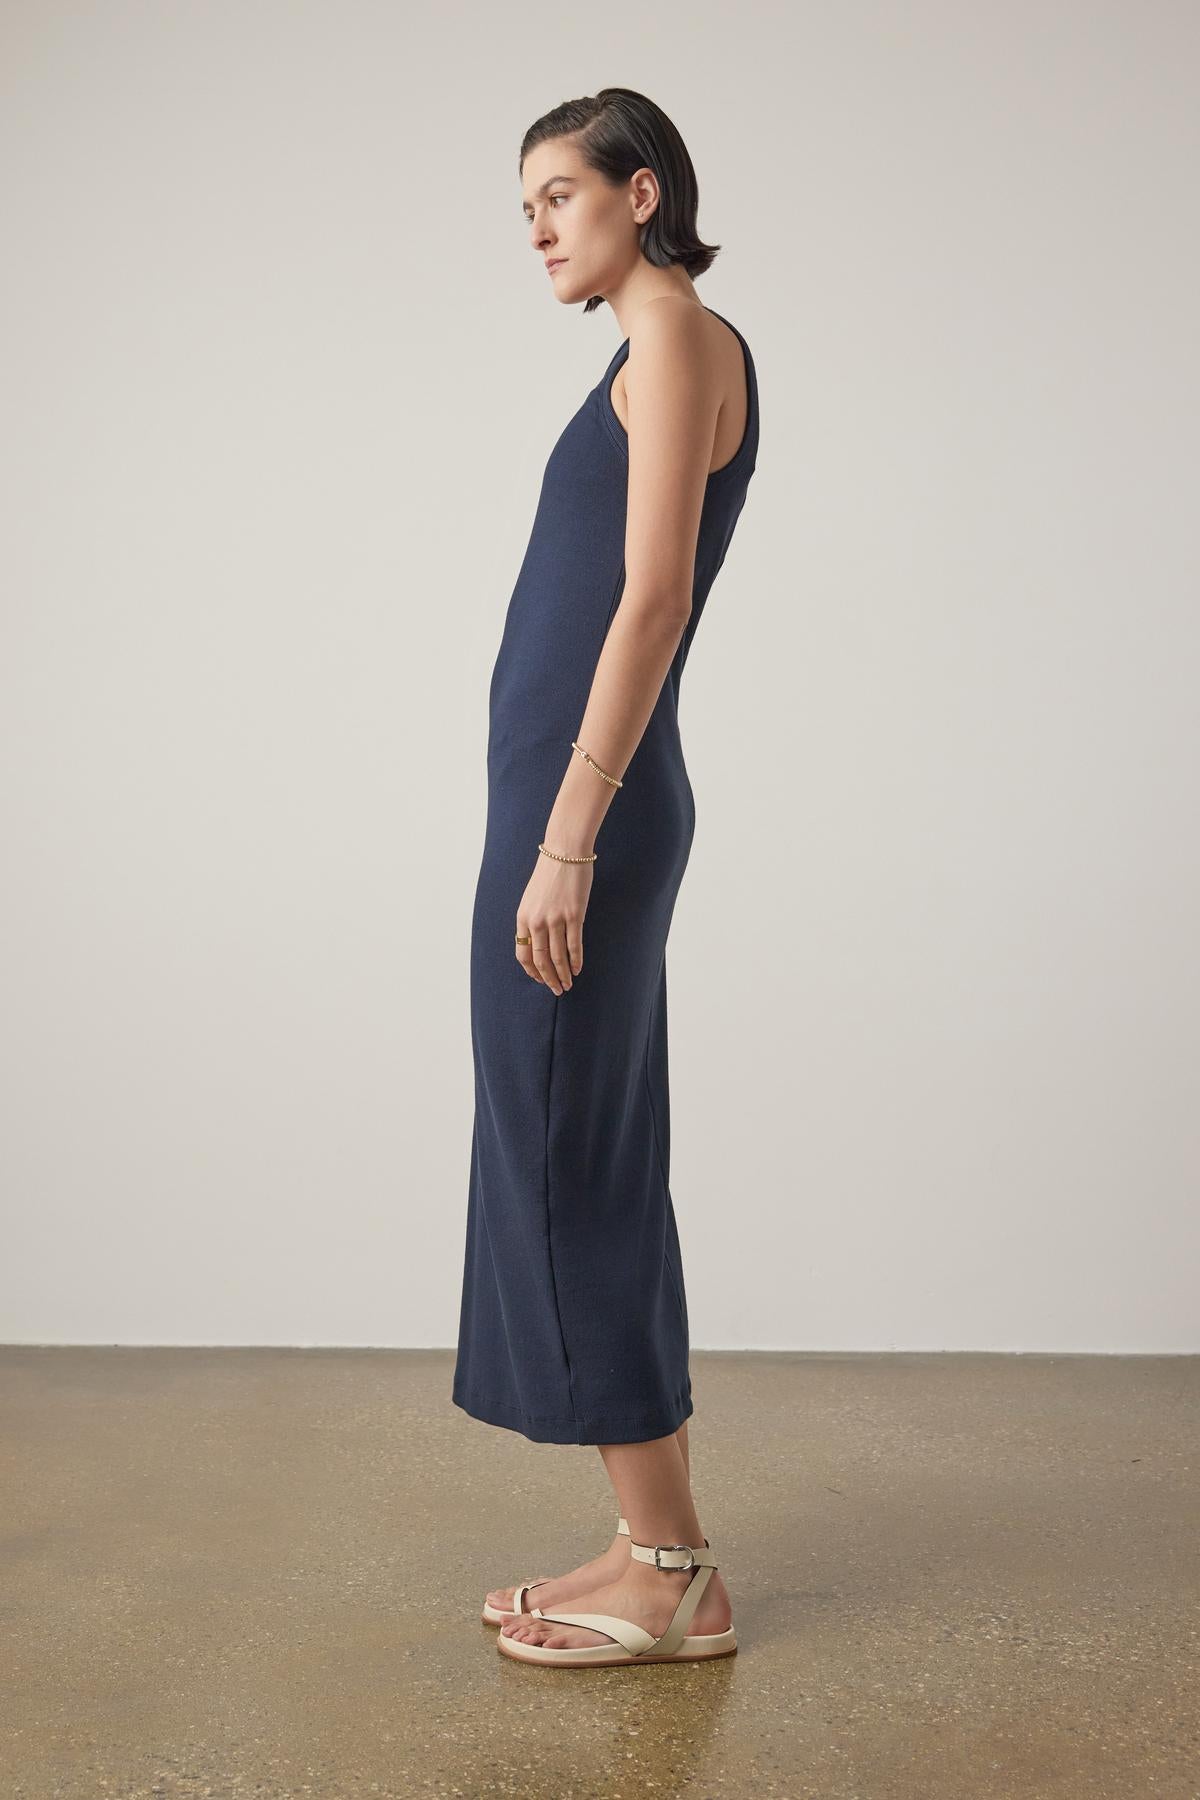   Woman in a navy blue sleeveless Griffith Dress by Velvet by Jenny Graham, with a crew neckline, standing sideways, paired with beige sandals against a neutral background. 